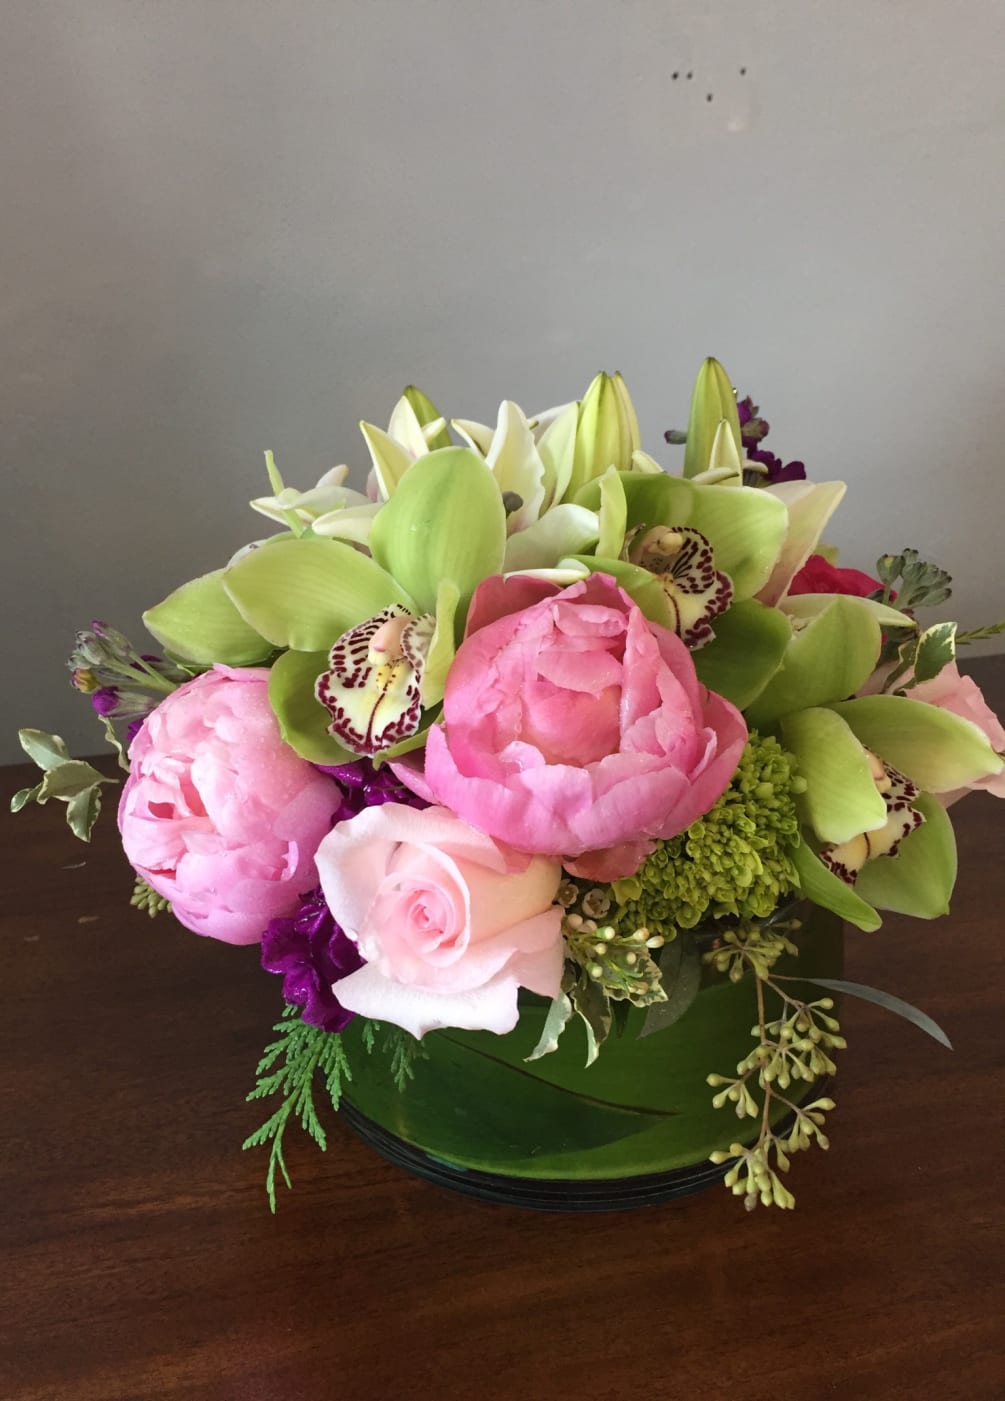 Low and lush design with roses and peonies to bring a burst